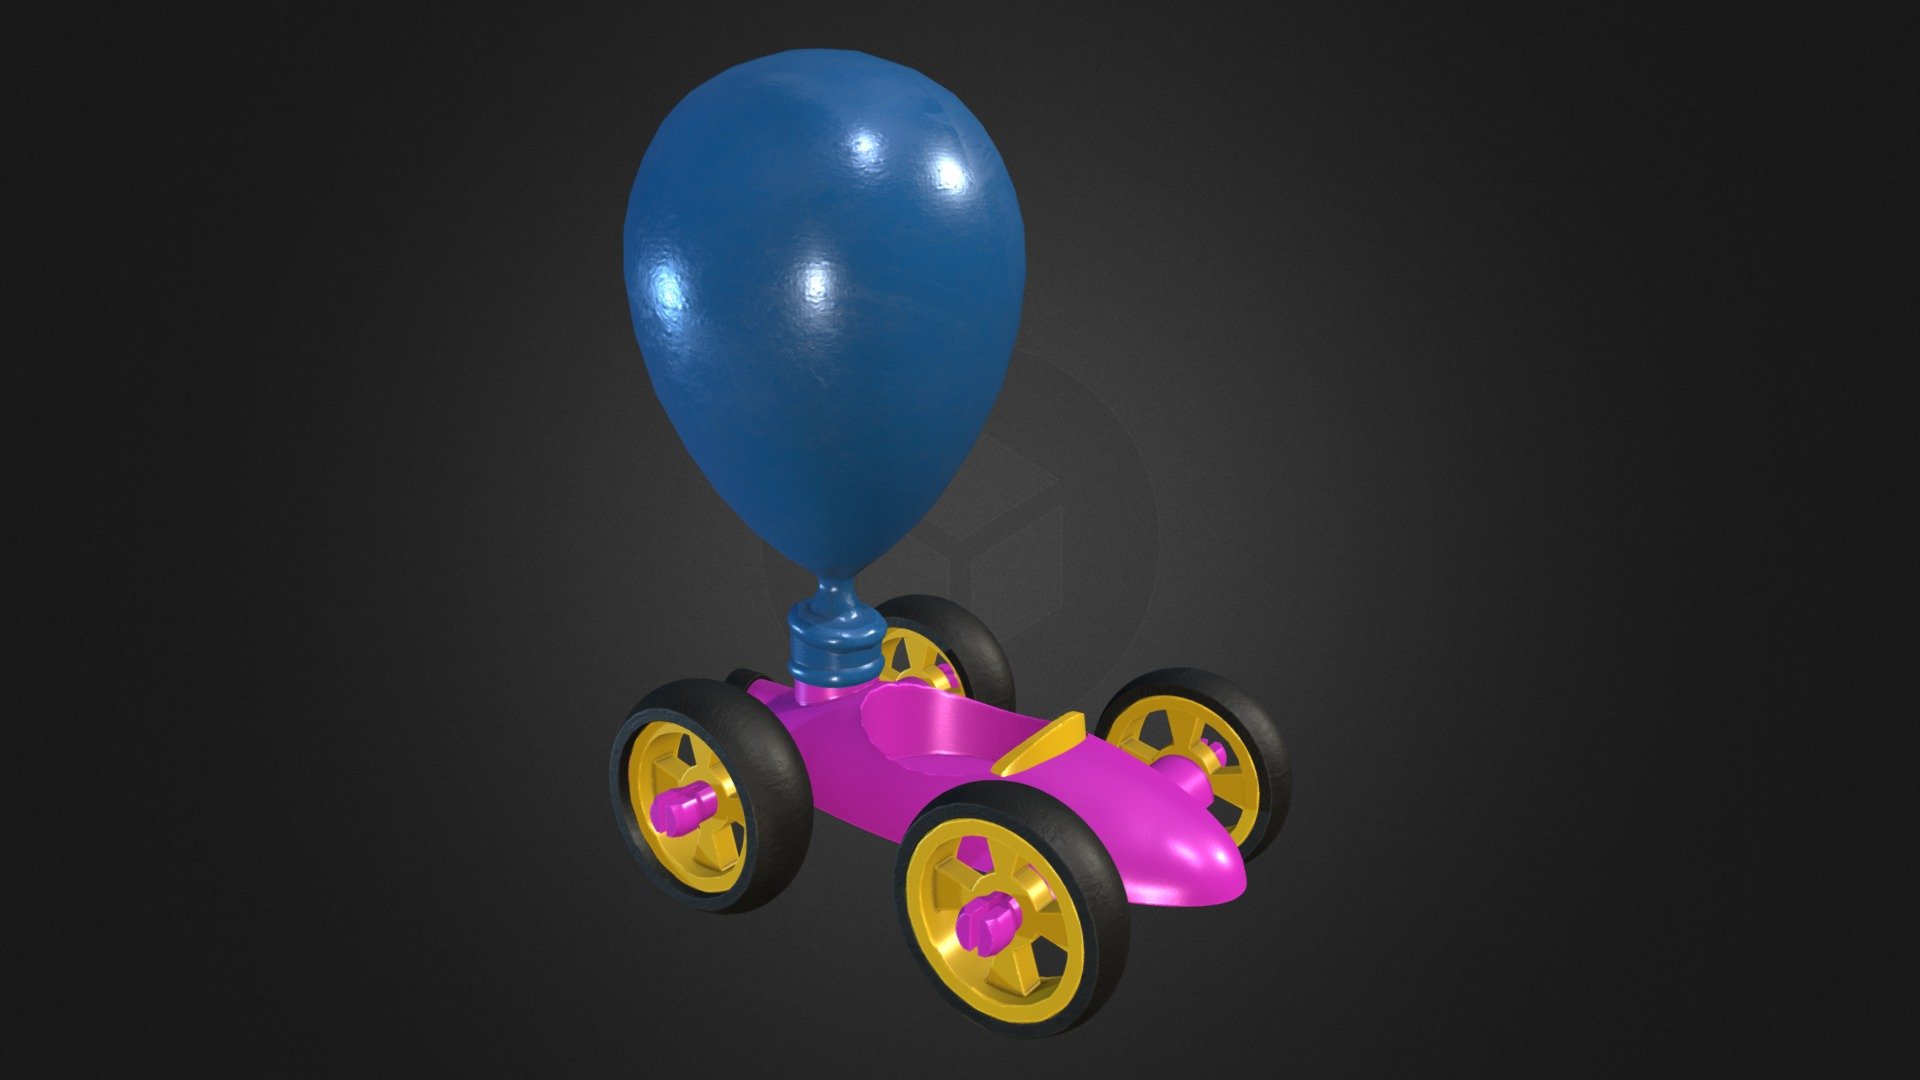 Balloon Toy Car (Commissioned Work)